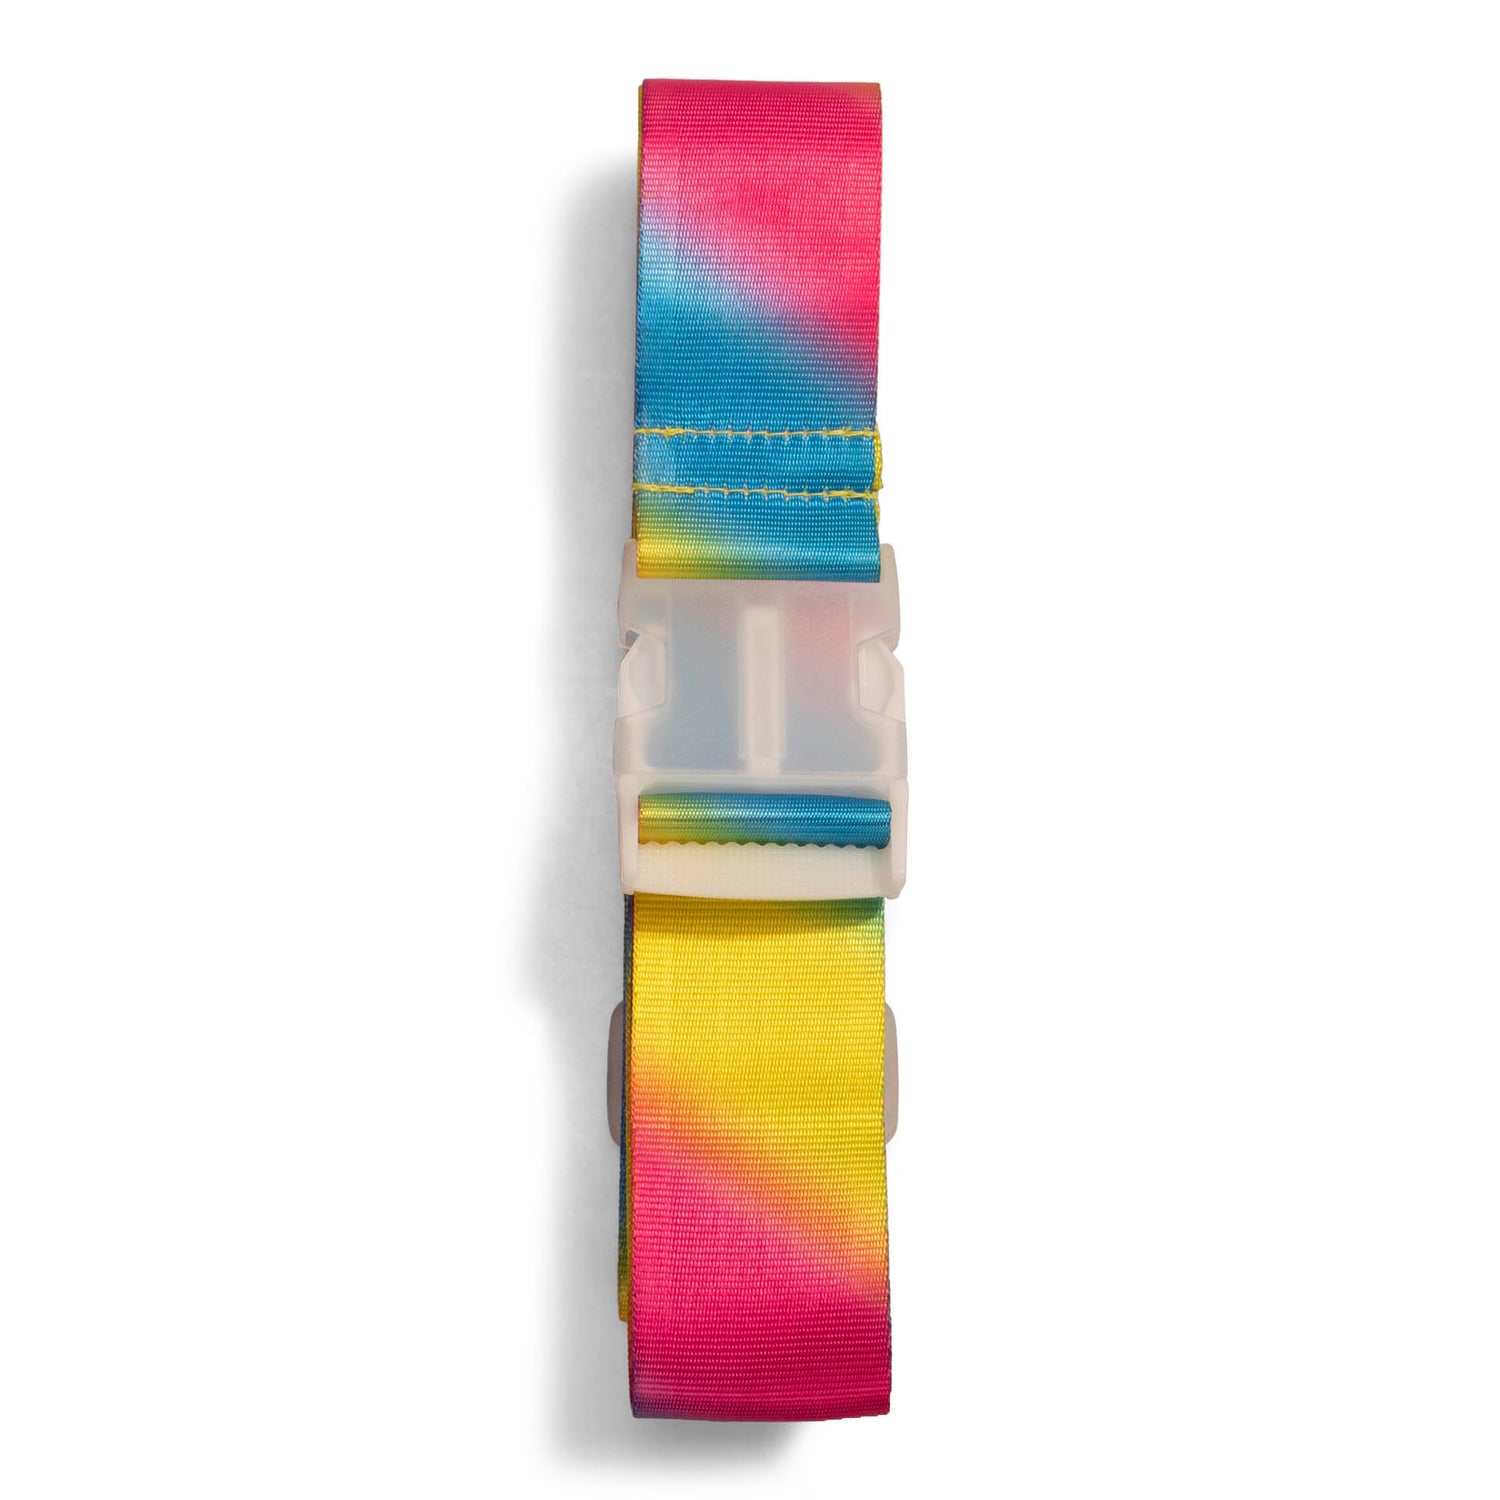 A colourful luggage strap that's folded and buckled, called Rainbow designed by Tracker showing its vibrant color texture.